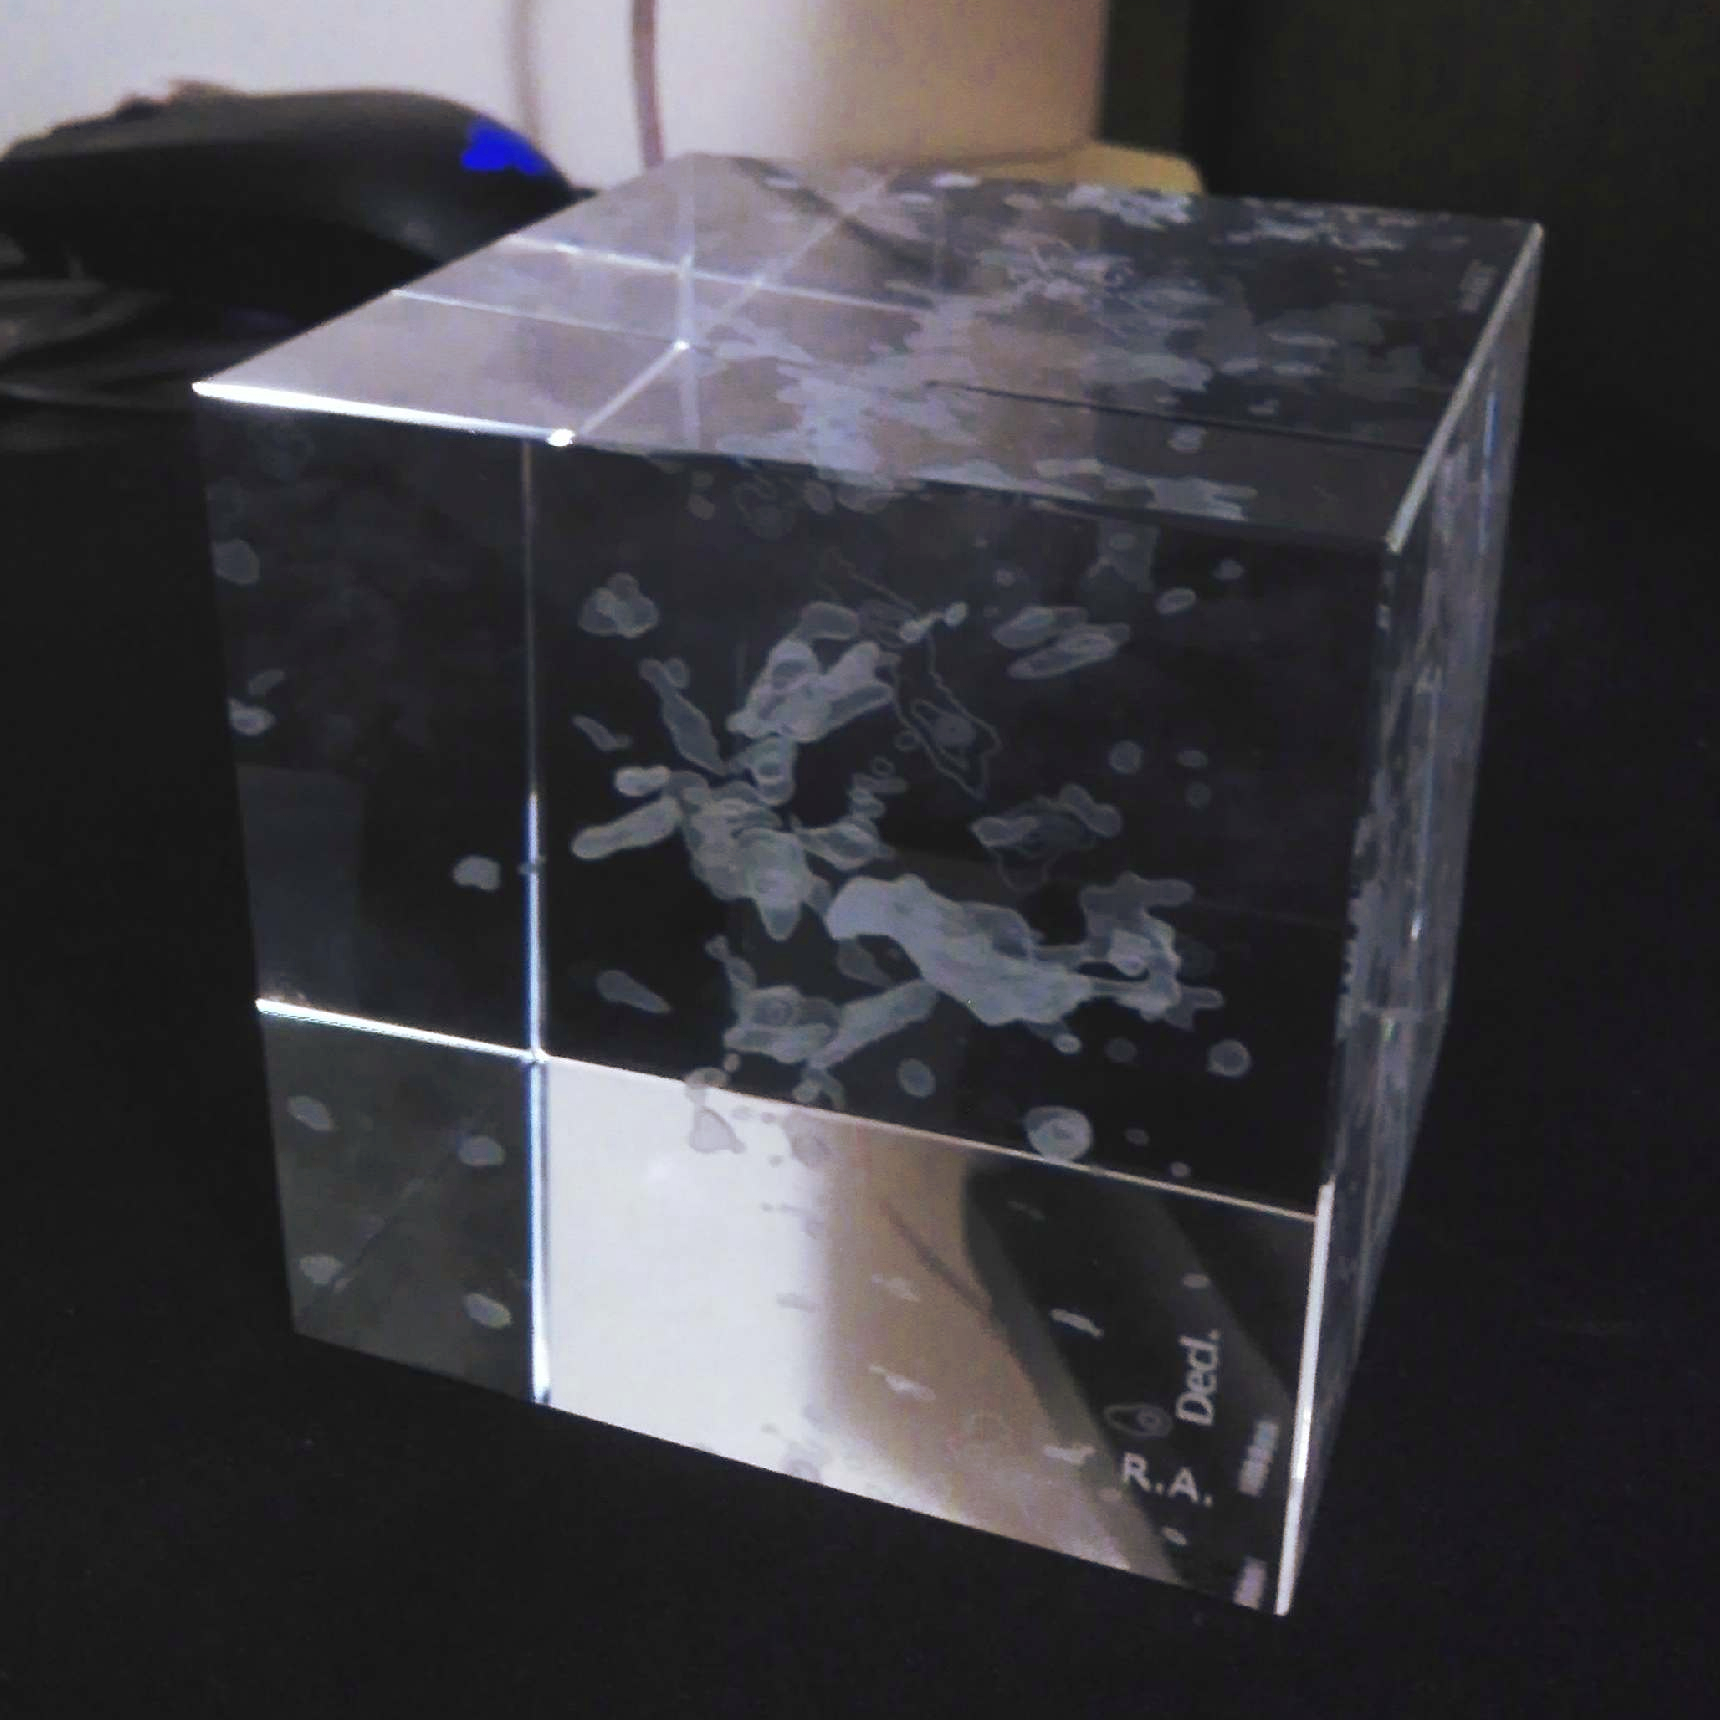 3D printed glass cube of G28.34